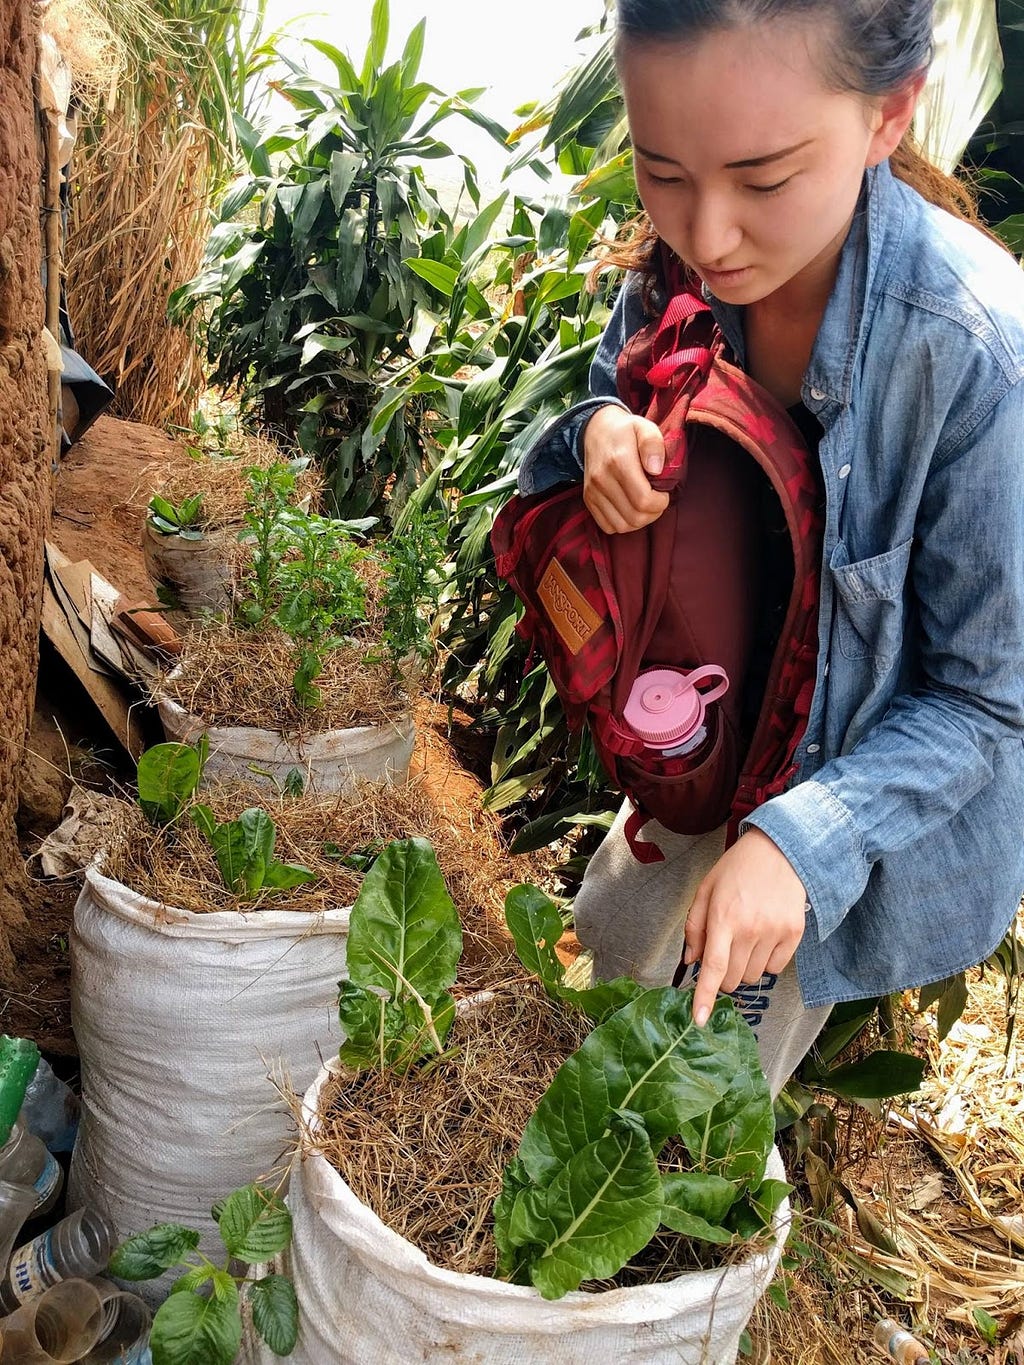 A student carrying a backpack walks through rows of plants, examining a potted plant in front of her.